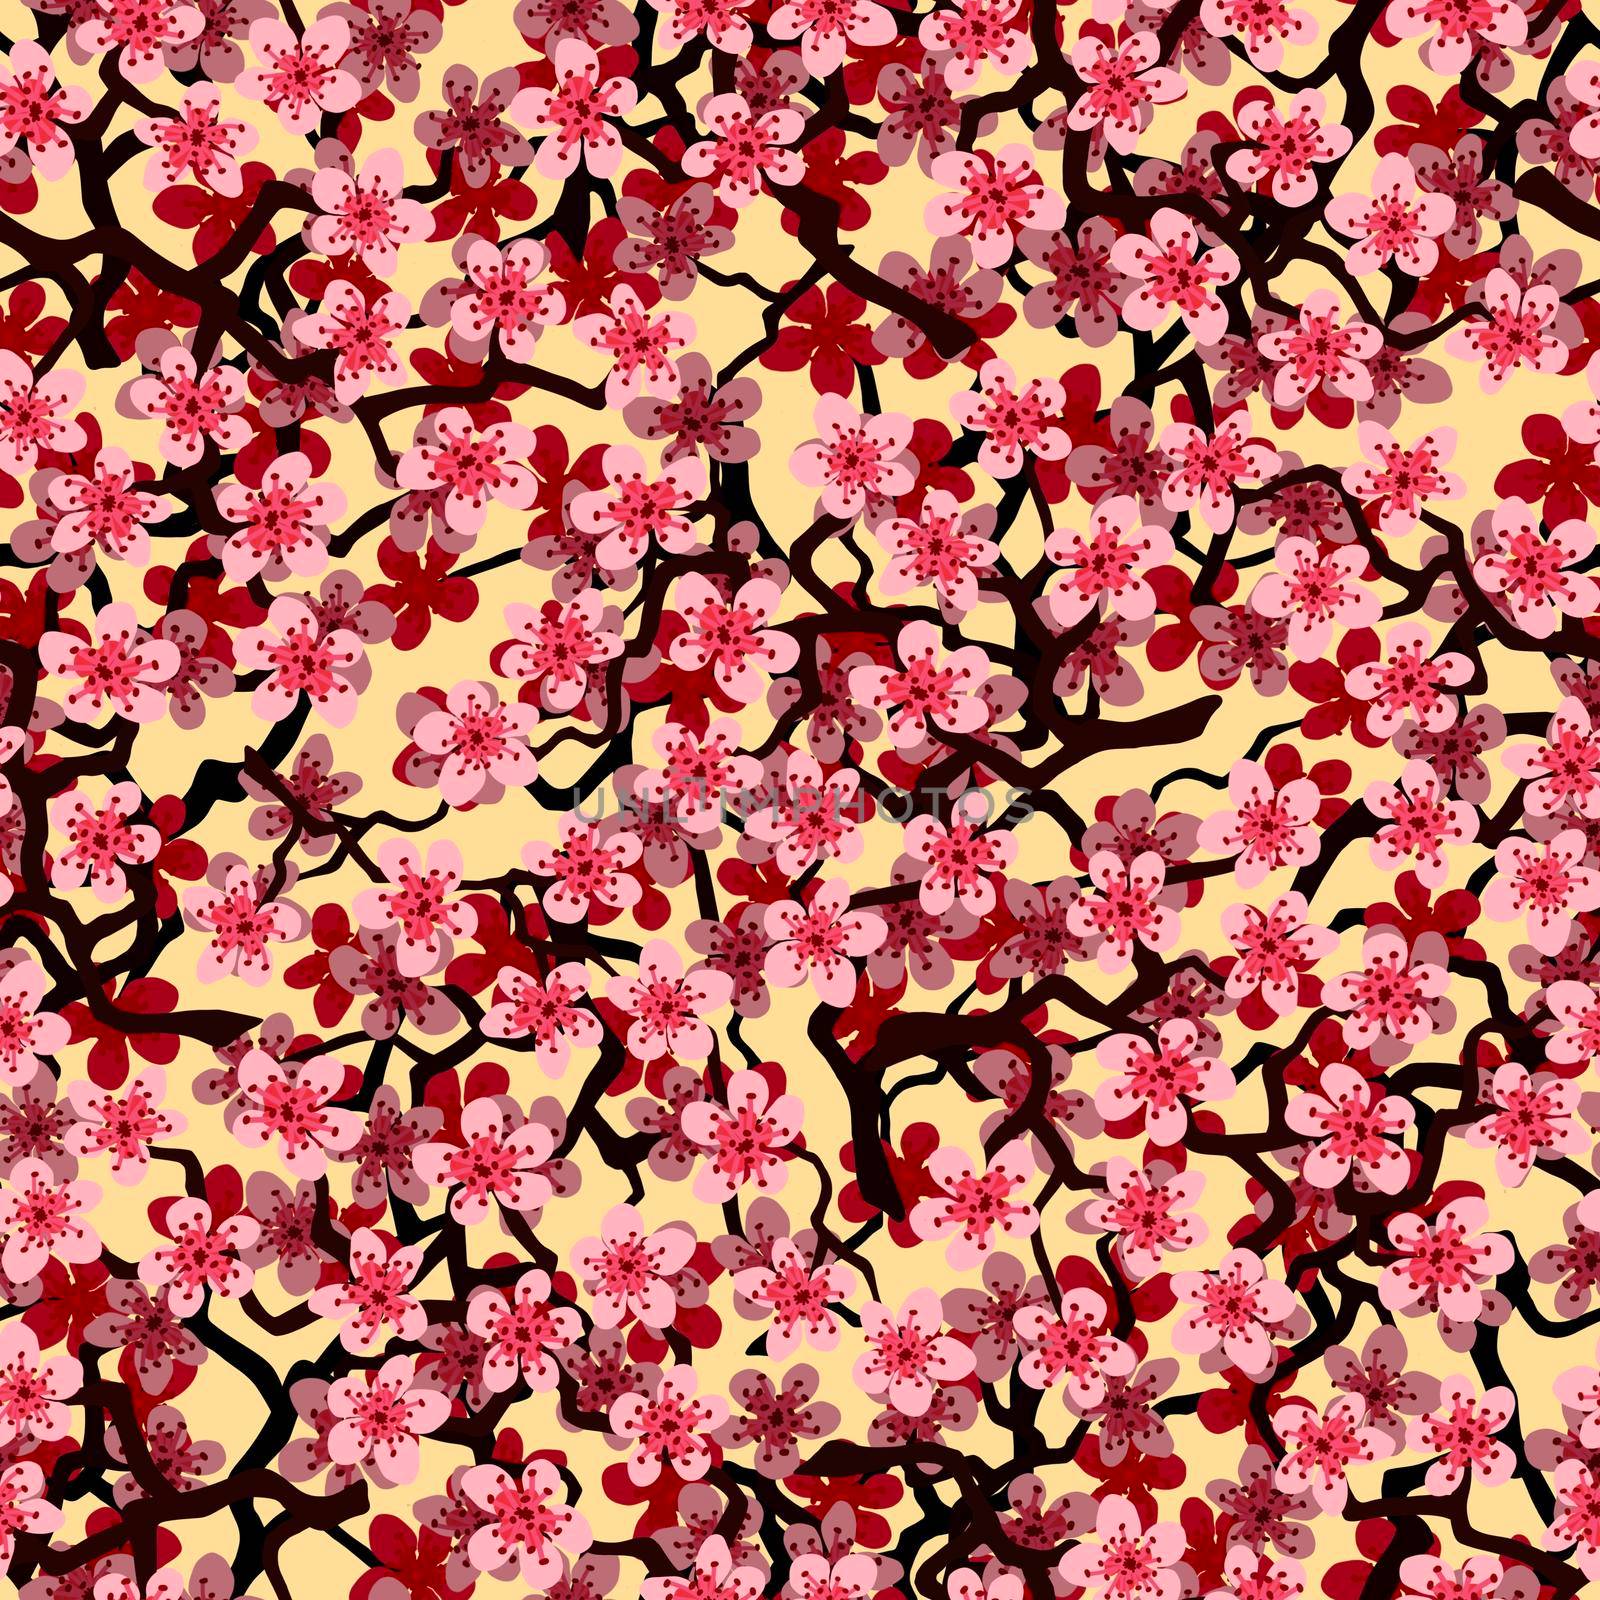 Seamless pattern with blossoming Japanese cherry sakura branches for fabric,packaging,wallpaper,textile decor,design, invitations,print,gift wrap,manufacturing.Pink flowers on yellow background. by Angelsmoon